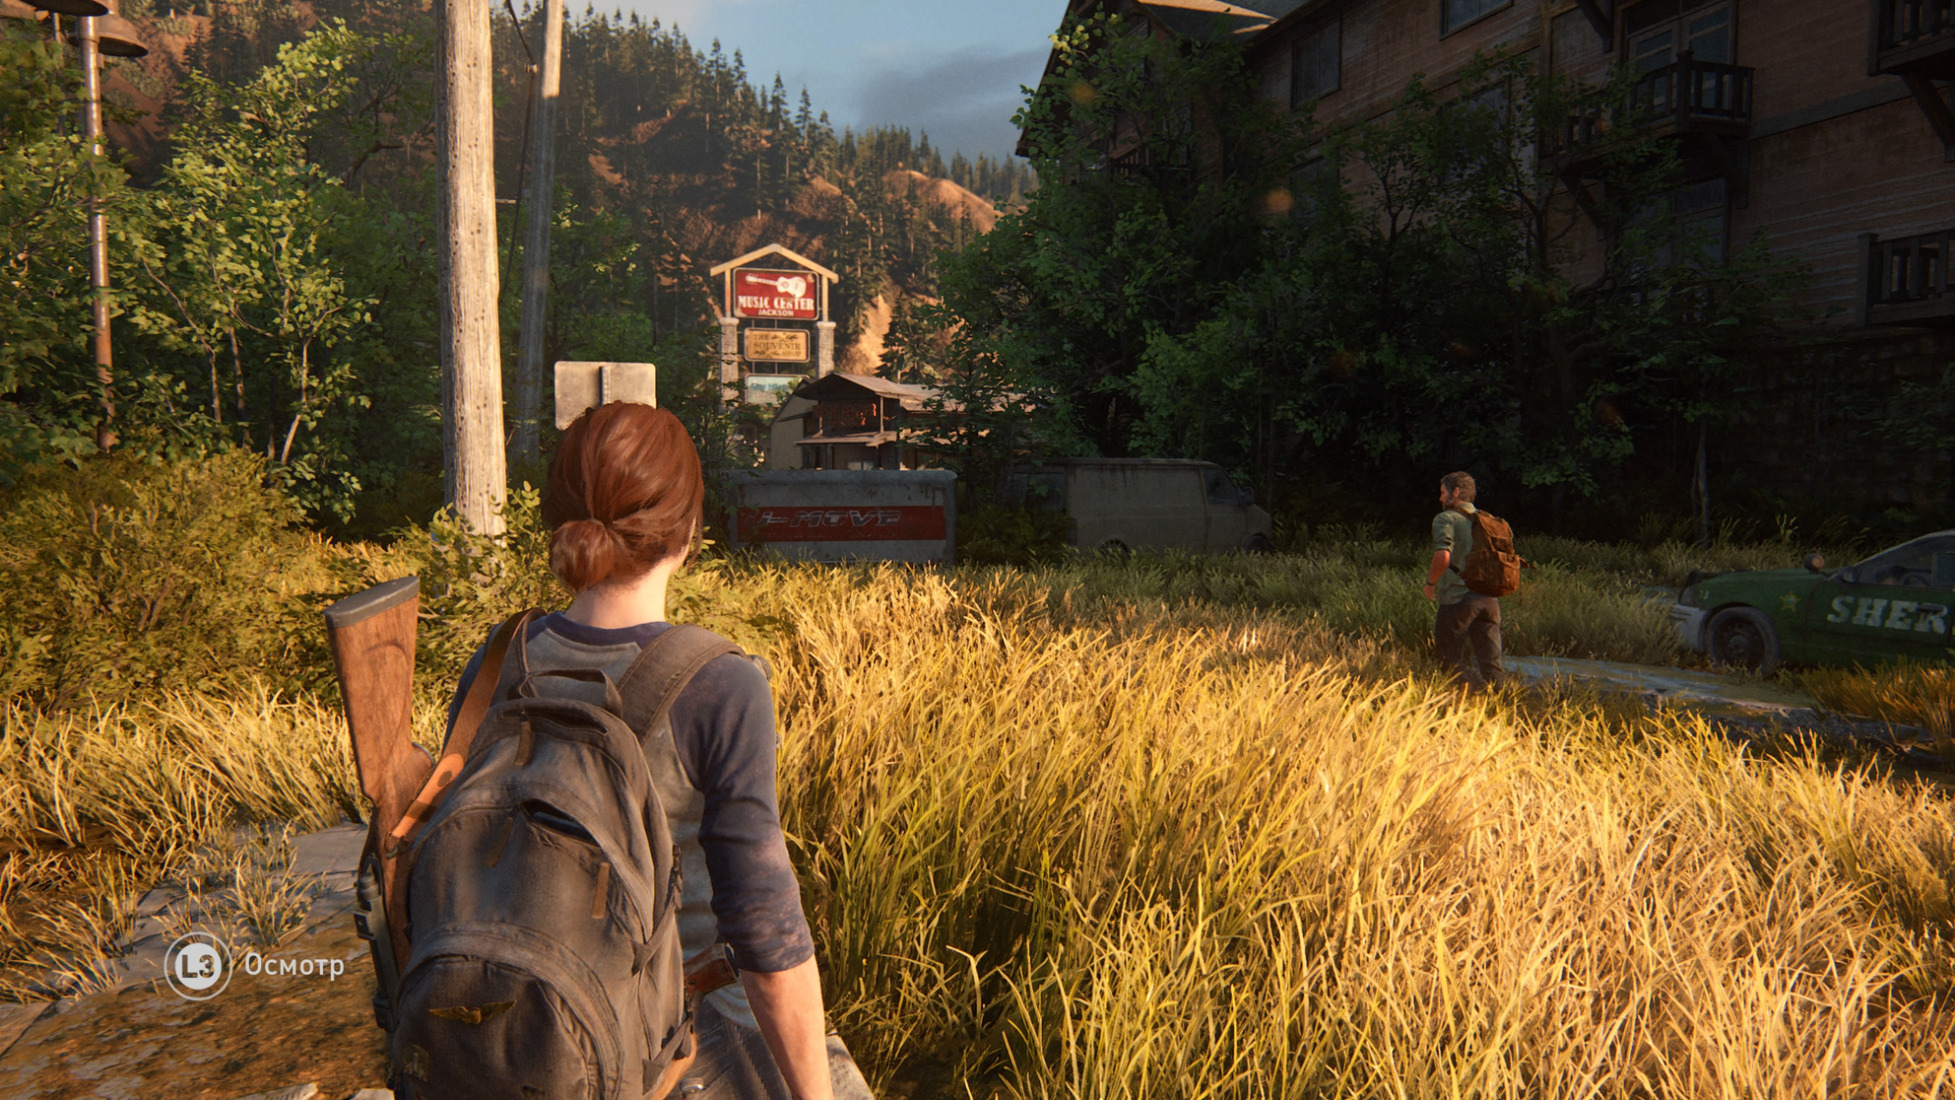 Selfdrillingsms. PLAYSTATION 4 the last of us. The last of us игра на ps4.